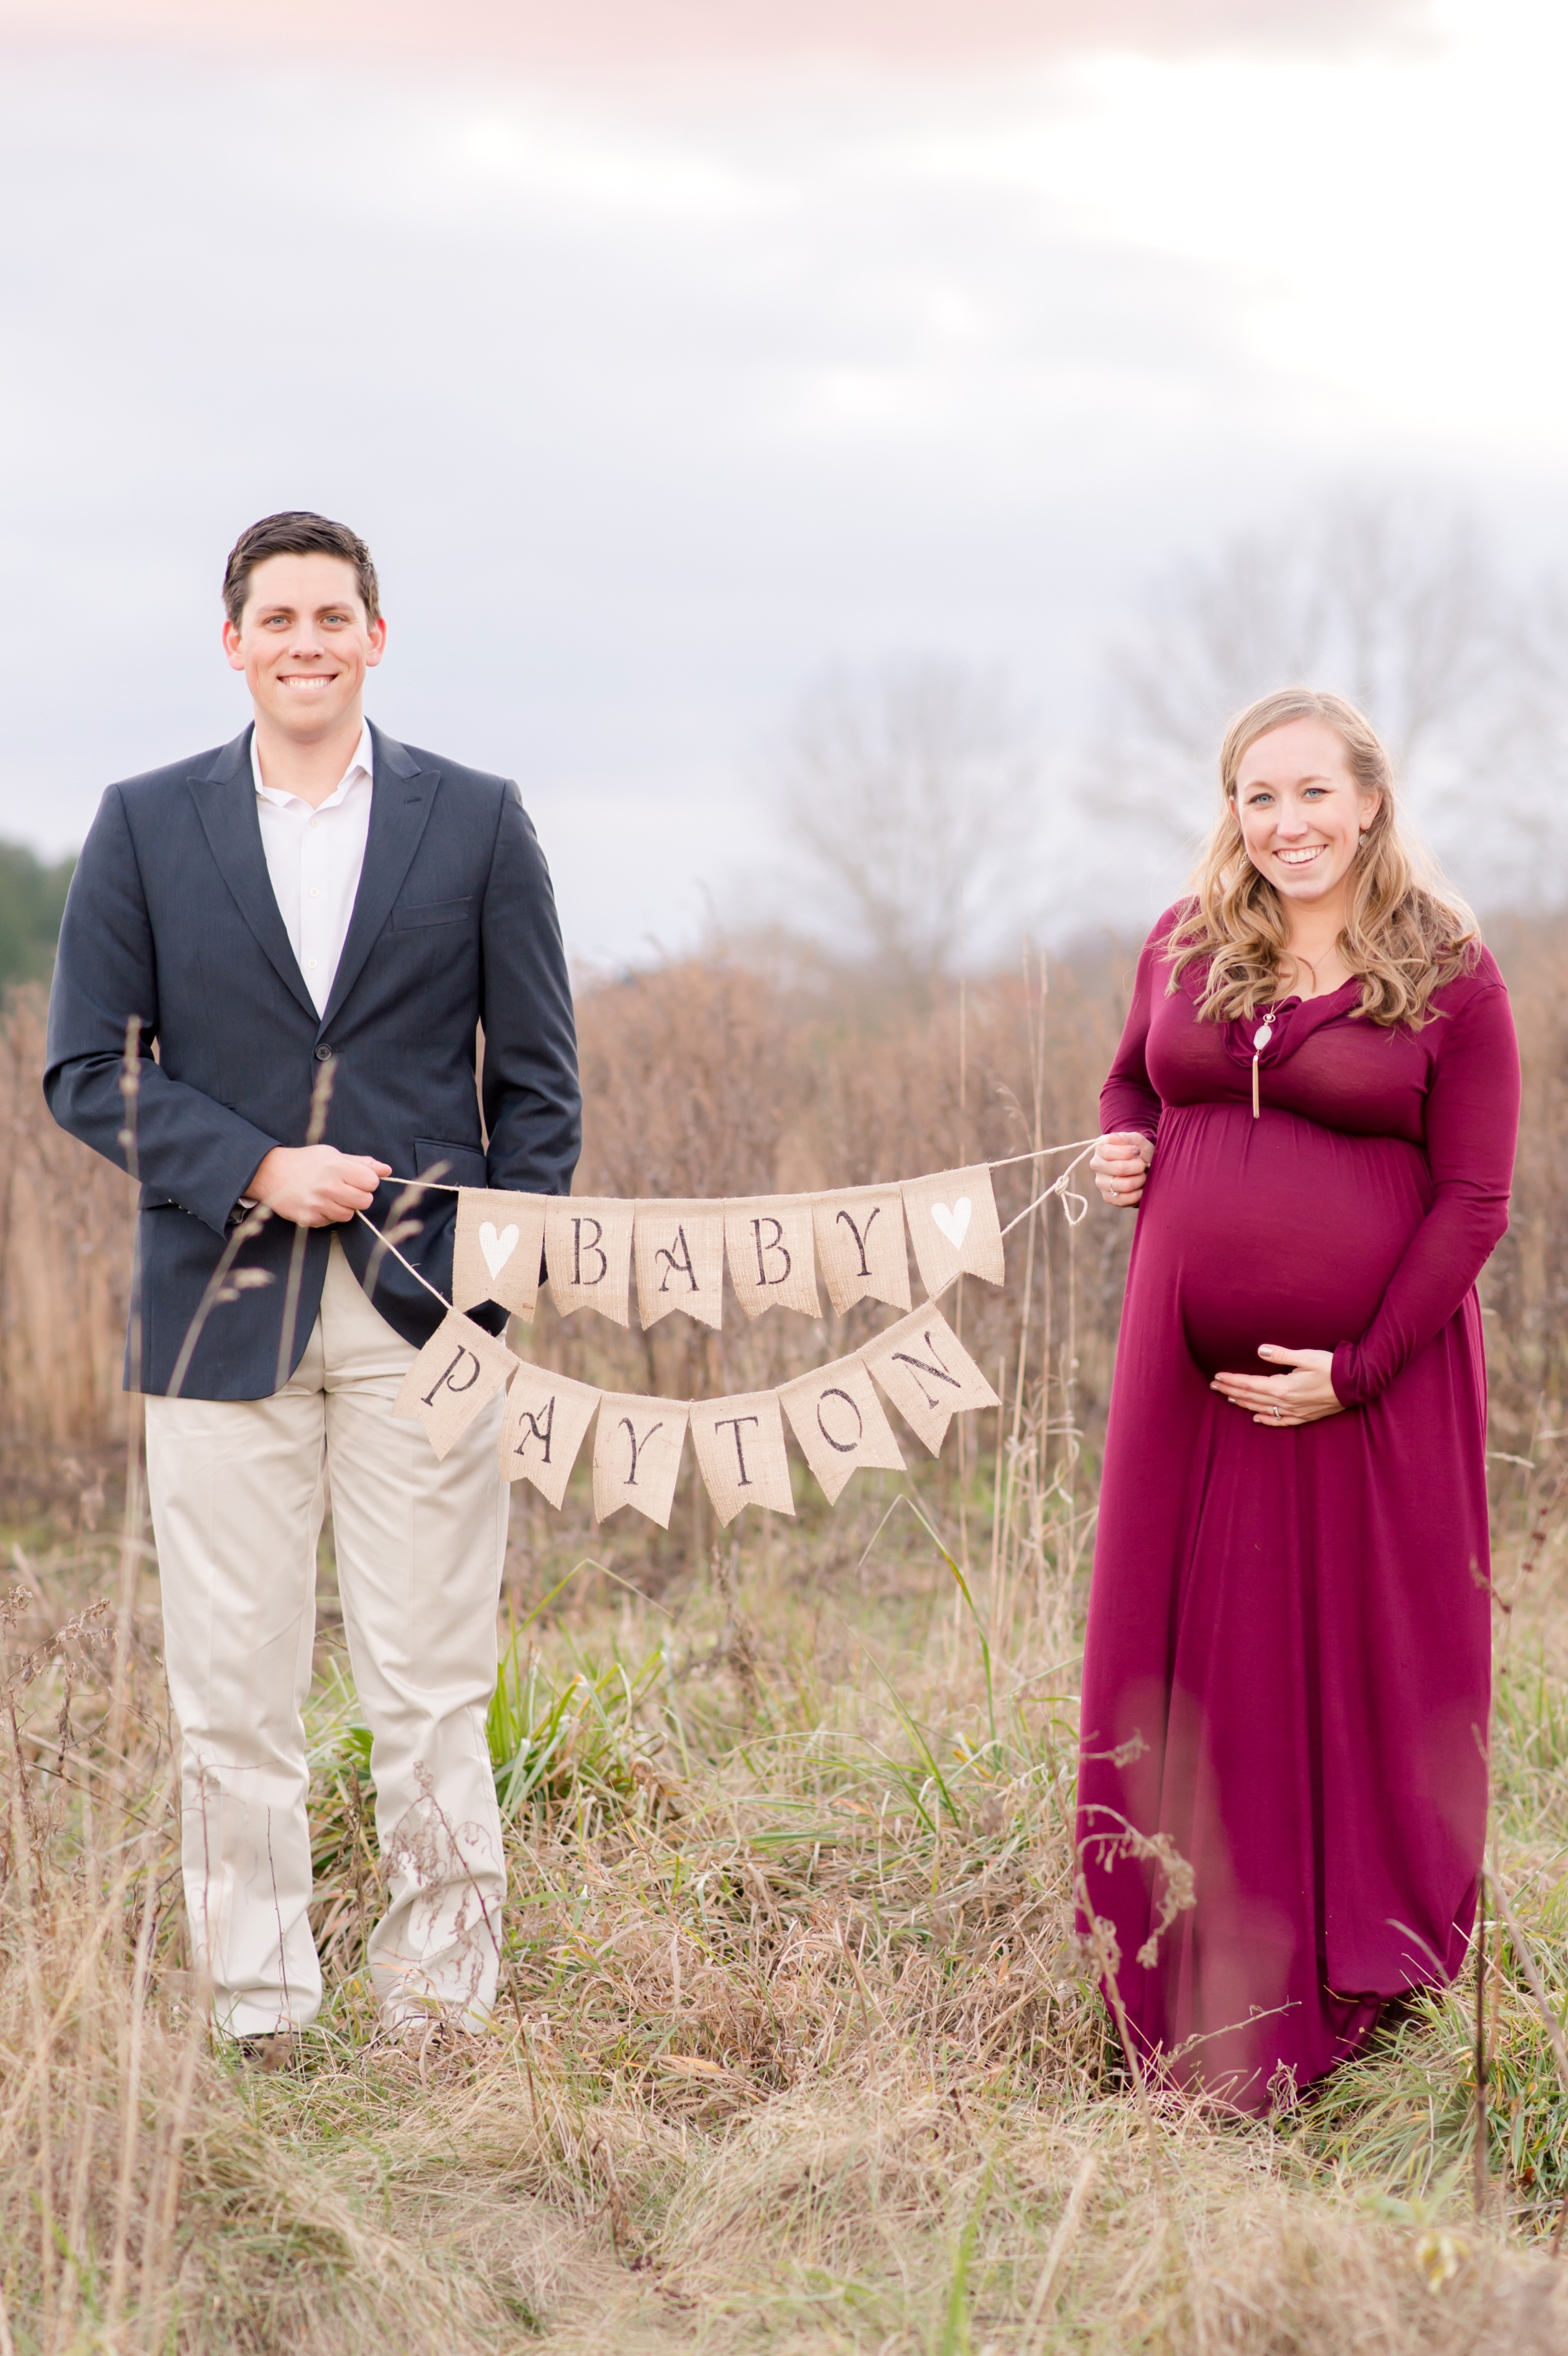 AG and Kevin Maternity-377_anna grace photography baltimore maryland maternity photographer cromwell valley park photo.jpg